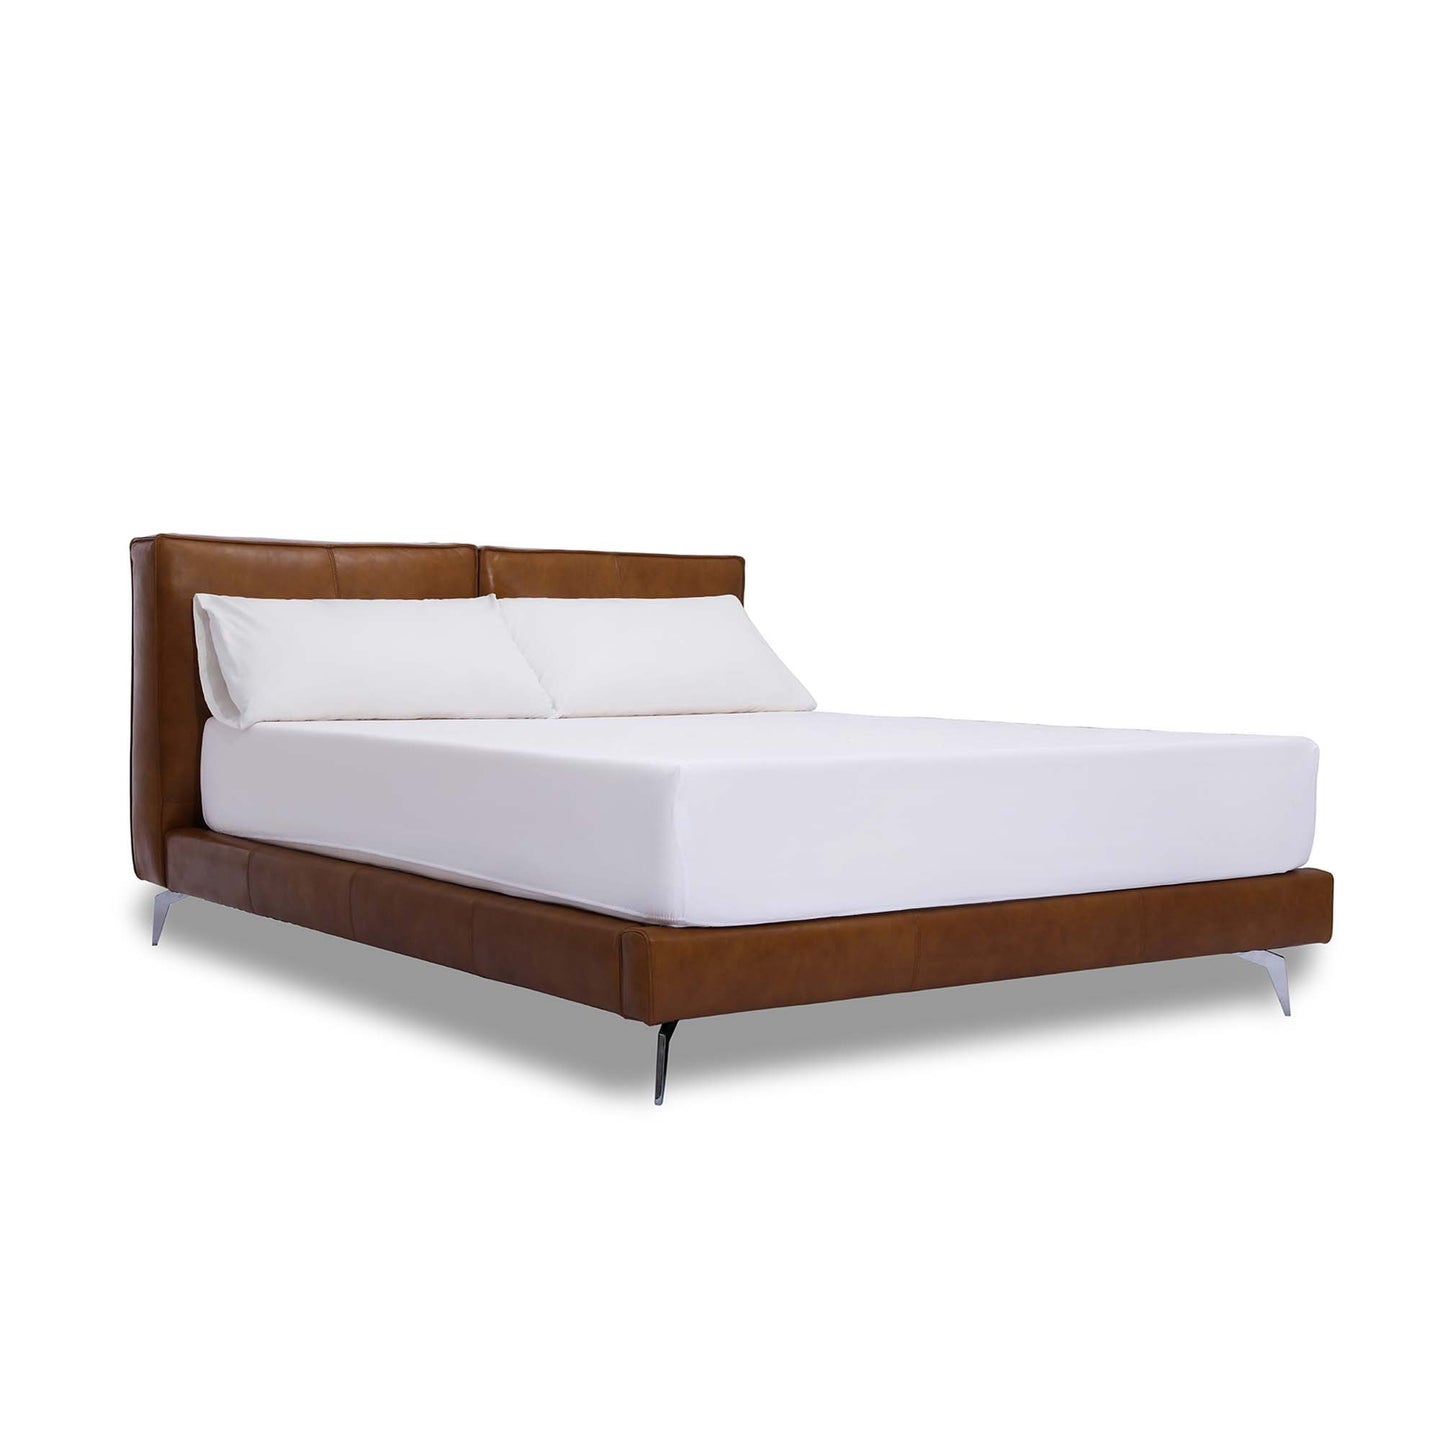 The Emery bedframe features a cushioned headboard, the flat surface can serve as a shelf for small items like phones, glasses and more. Additionally, the platform structure facilitates simple sheet-changing without having to lift the mattress - a feature your back is sure to appreciate. Choice of leather available.